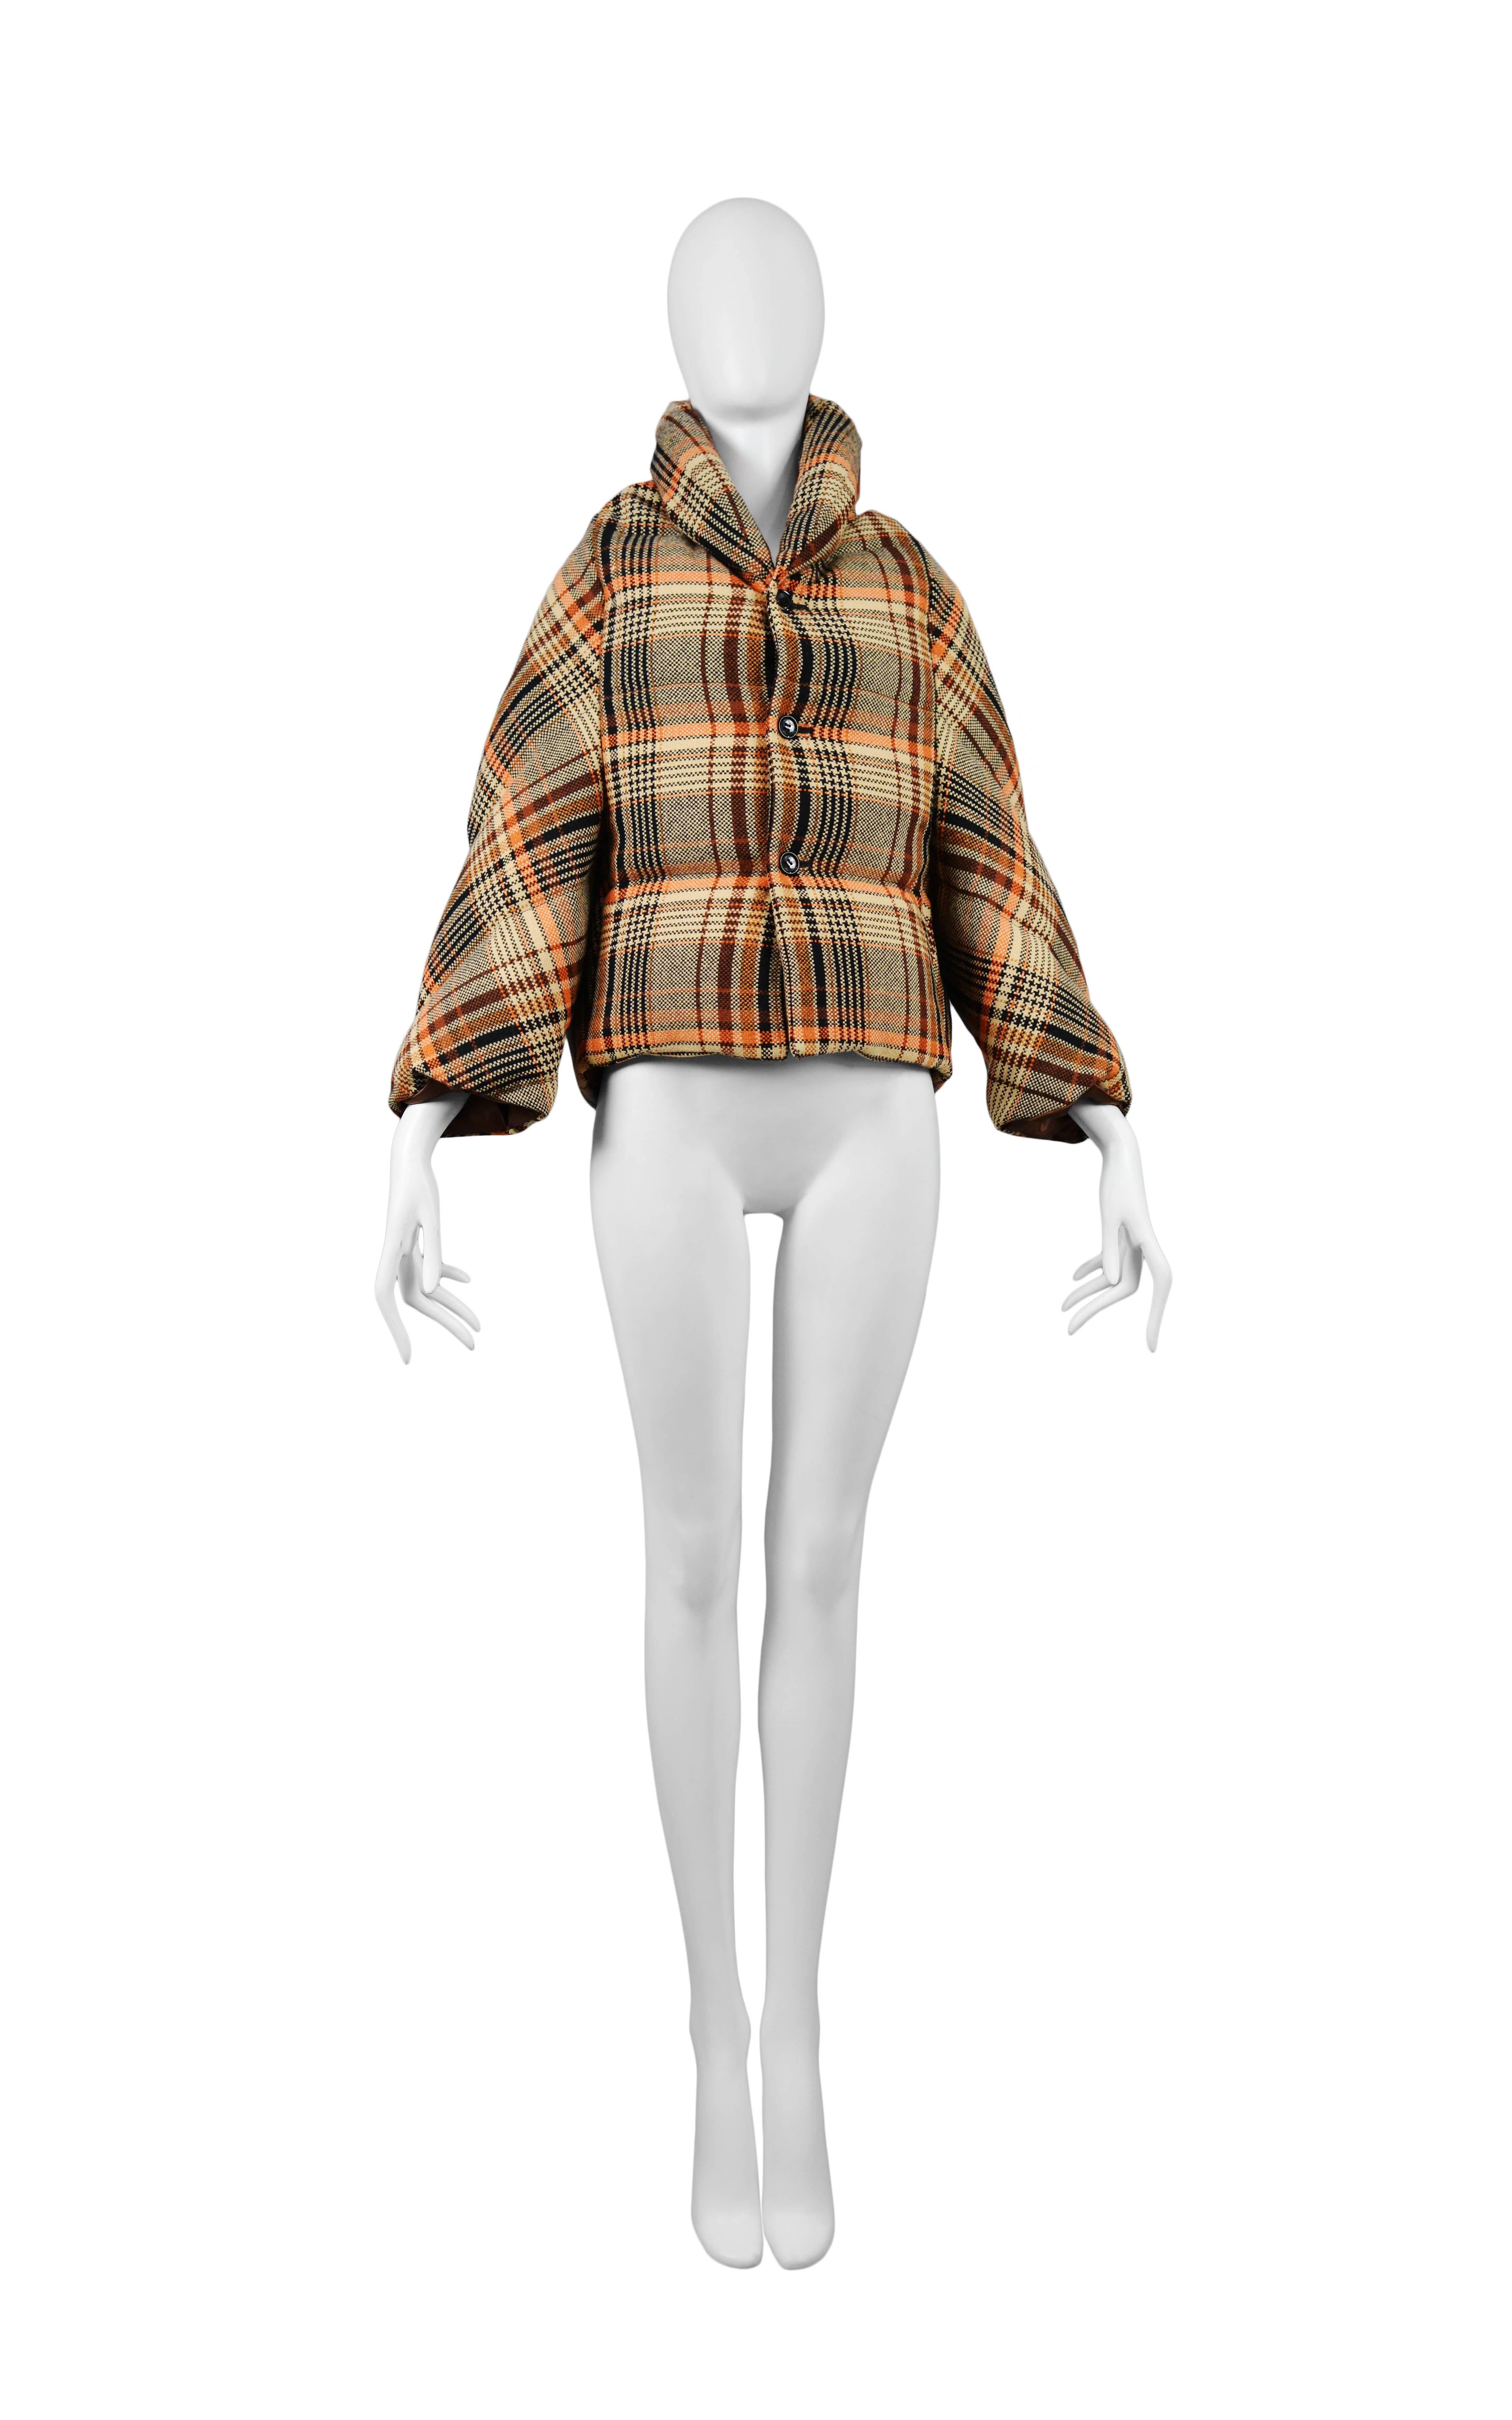 Vintage Junya Watanabe brown plaid puffer jacket featuring down stuffing and a button front closure. Circa 2004.
Please inquire for additional images.